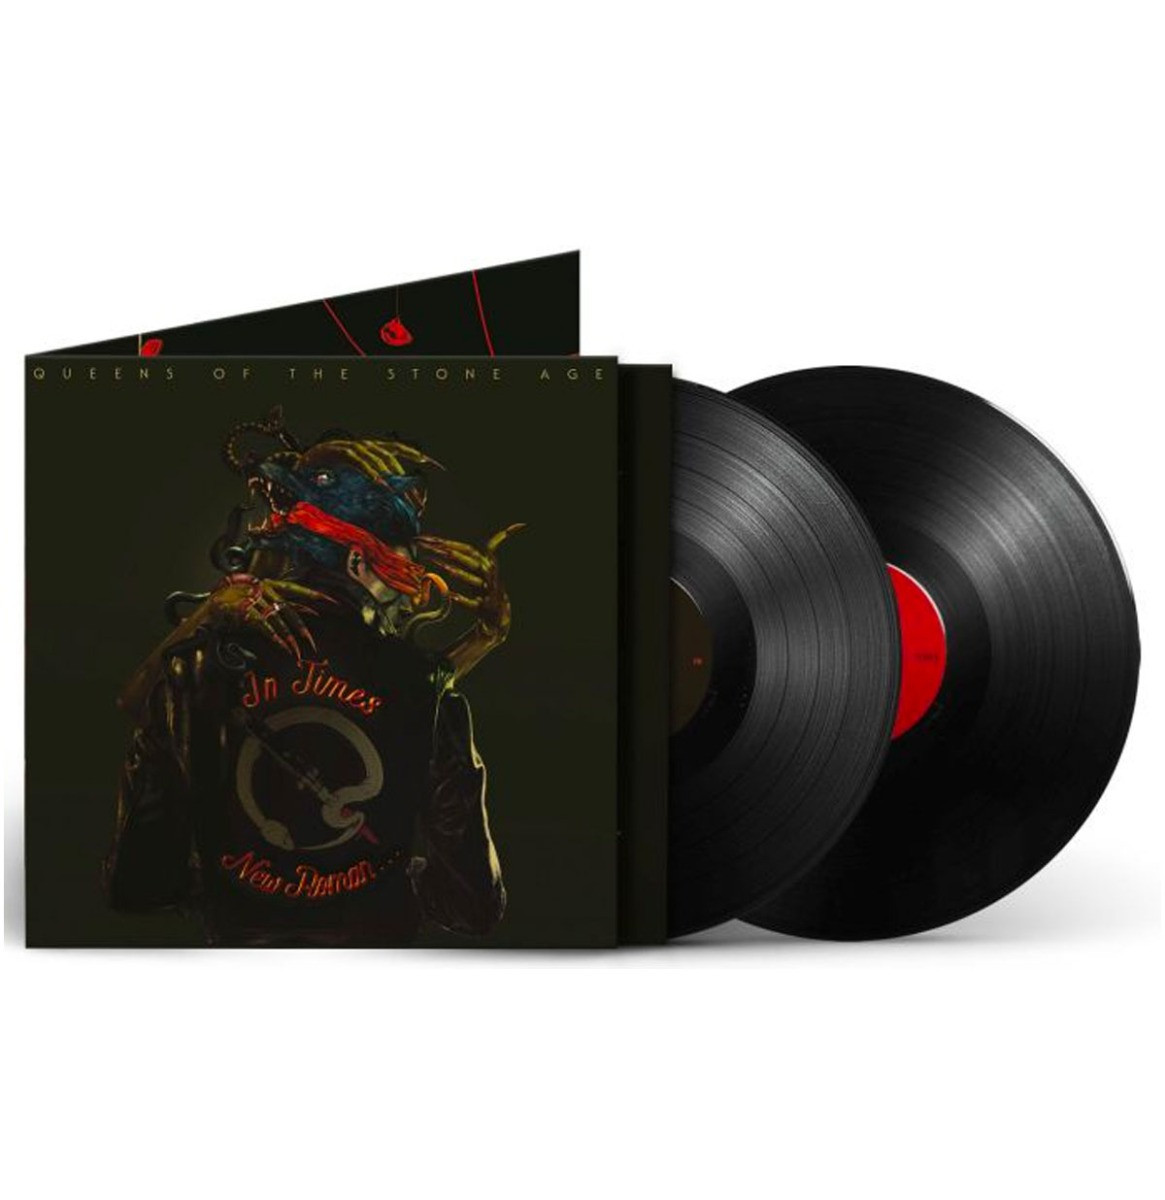 Queens Of The Stone Age - In Times New Roman... 2LP